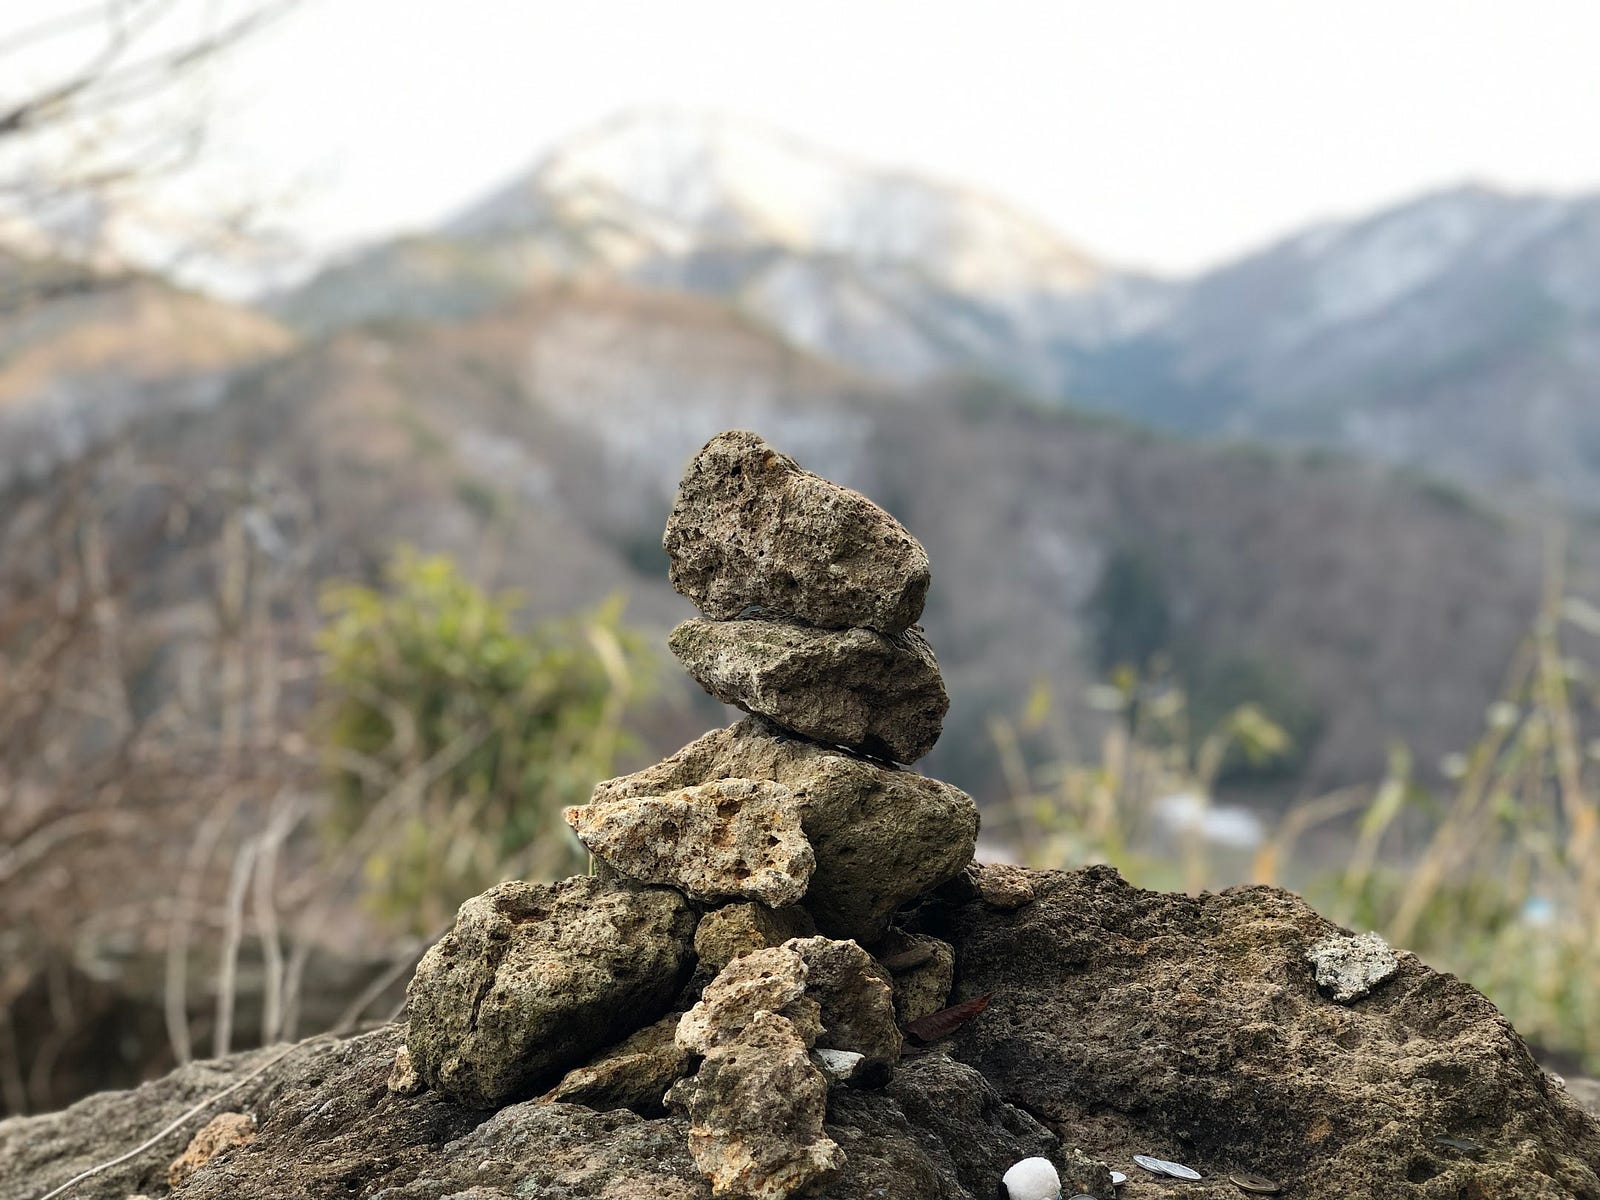 Rocks stacked on top of each other with a mountain in the background. Sights such as these are common in Japan.